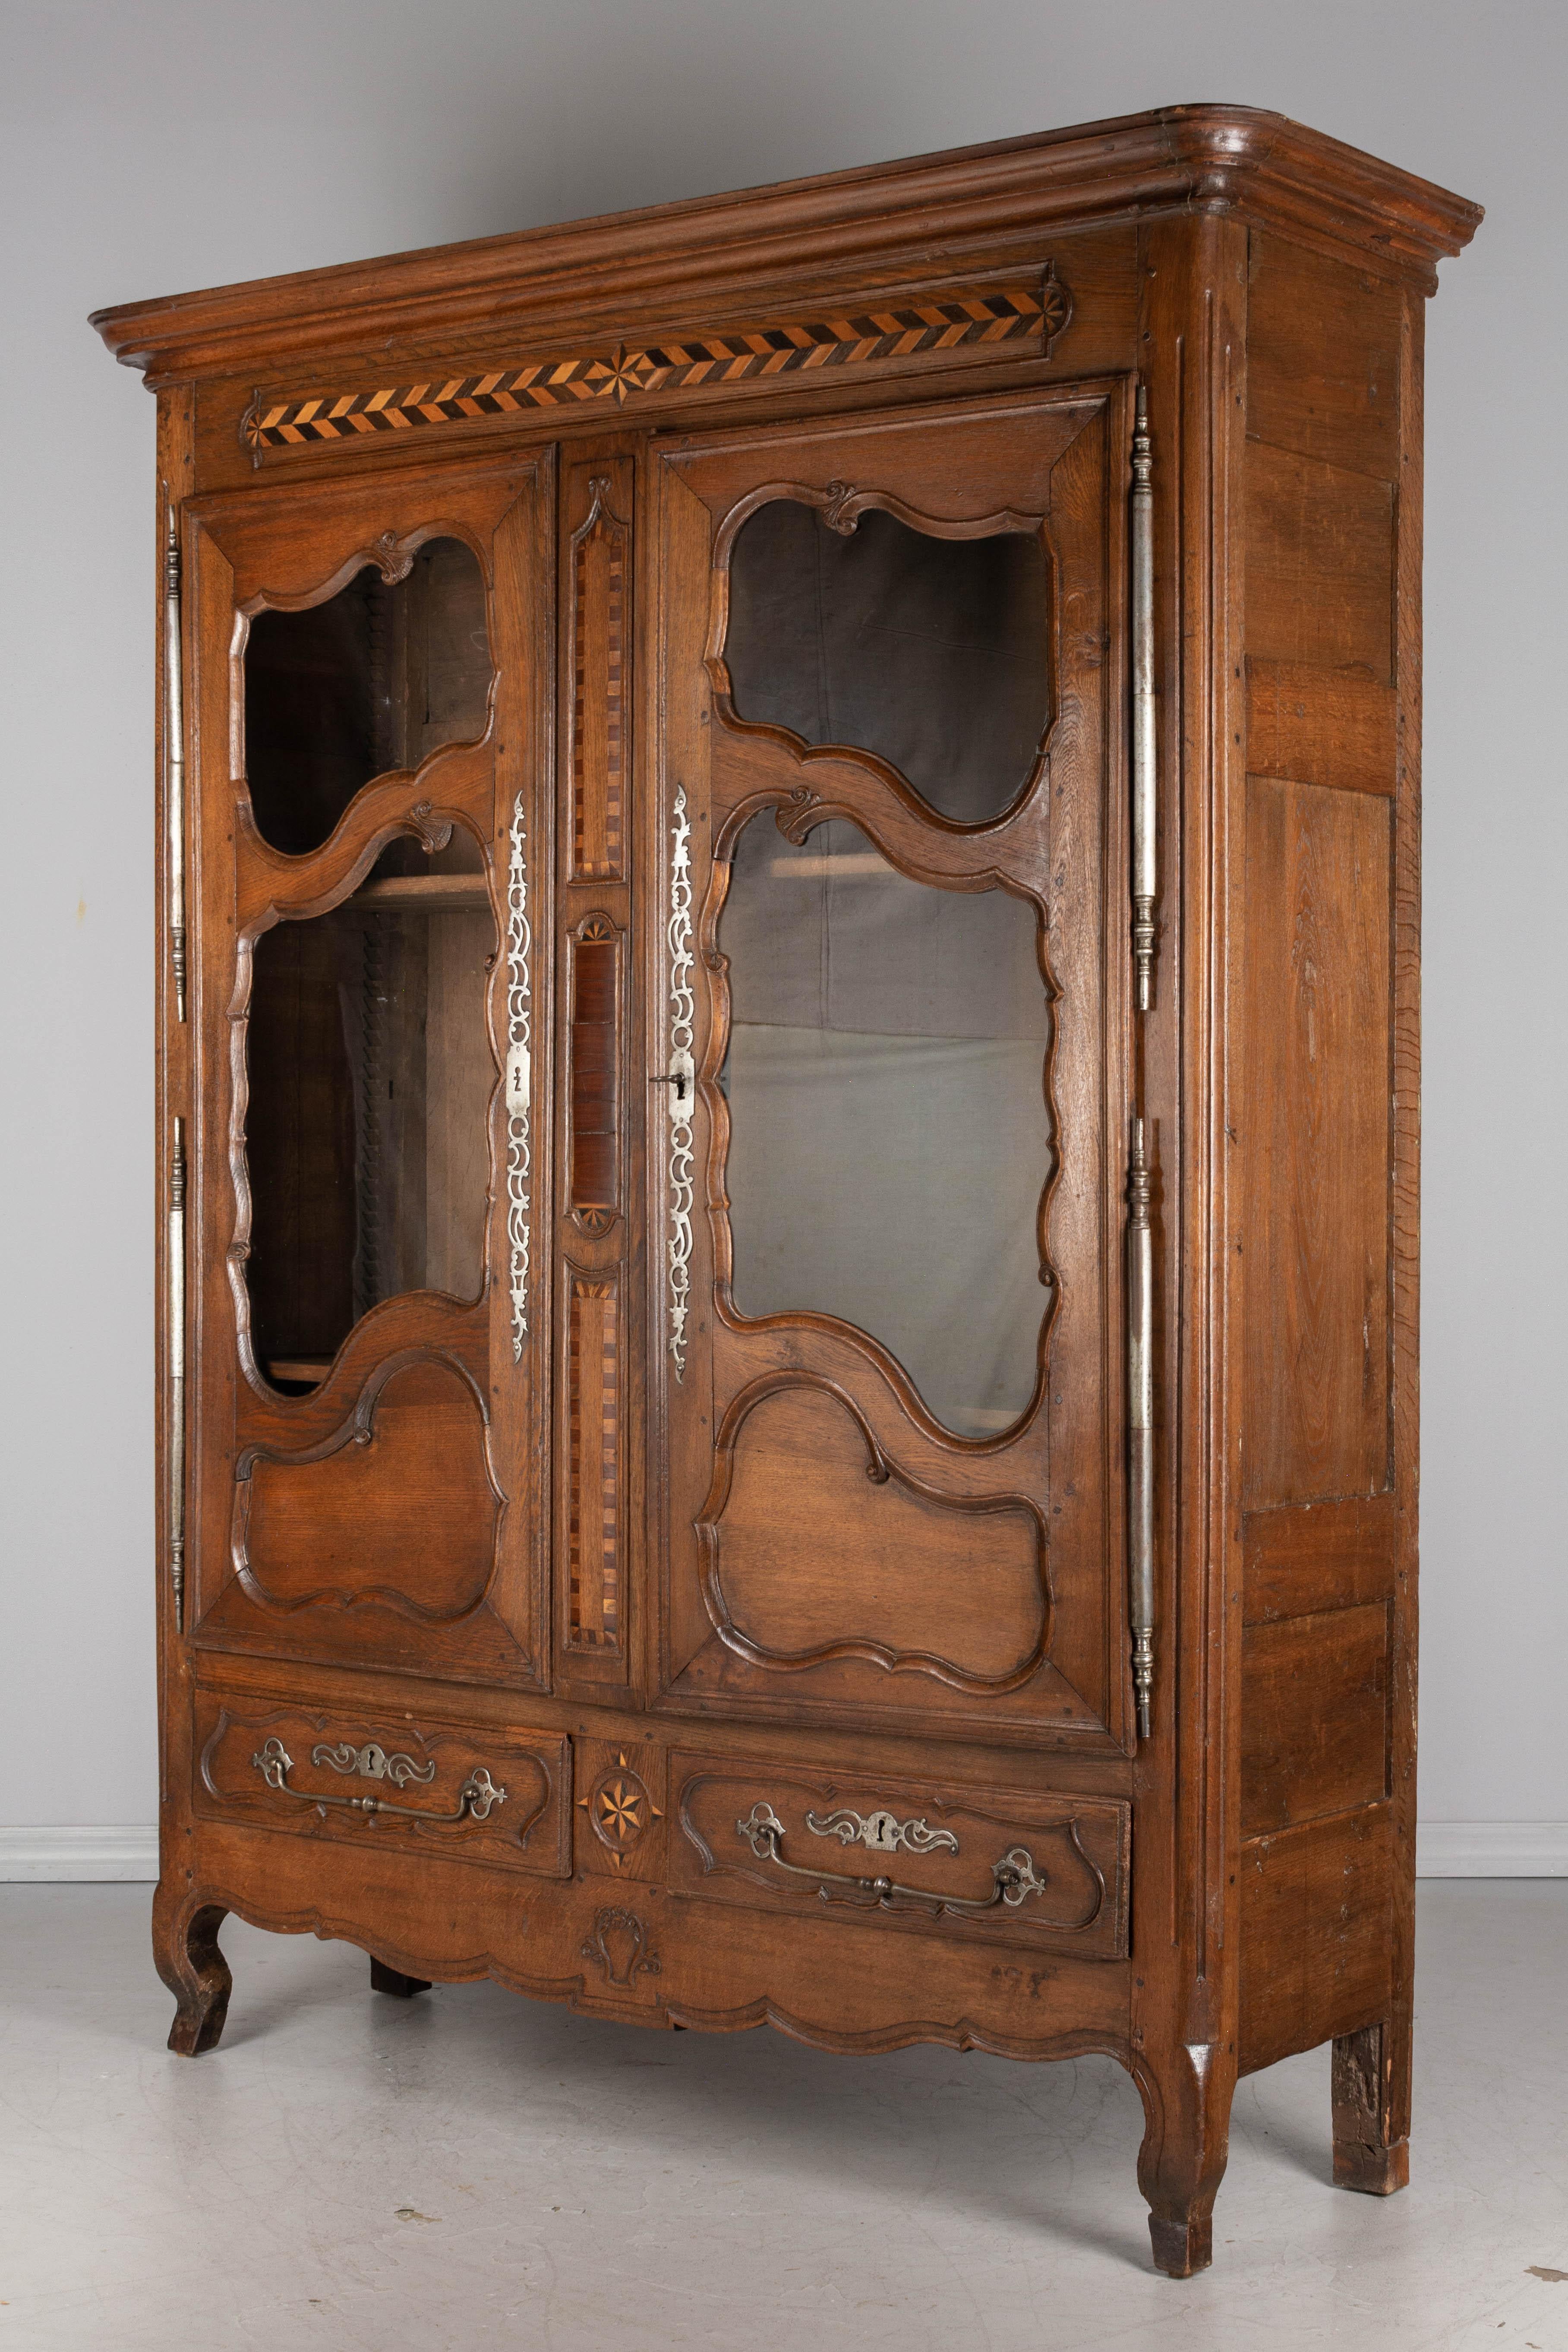 An 18th century country French armoire, or vitrine, from Alsace made of solid oak with inlaid mahogany and cherry Marquetry details. Original iron hardware with long decorative escutcheons on the doors, wide drawers pulls and large heavy hinges.